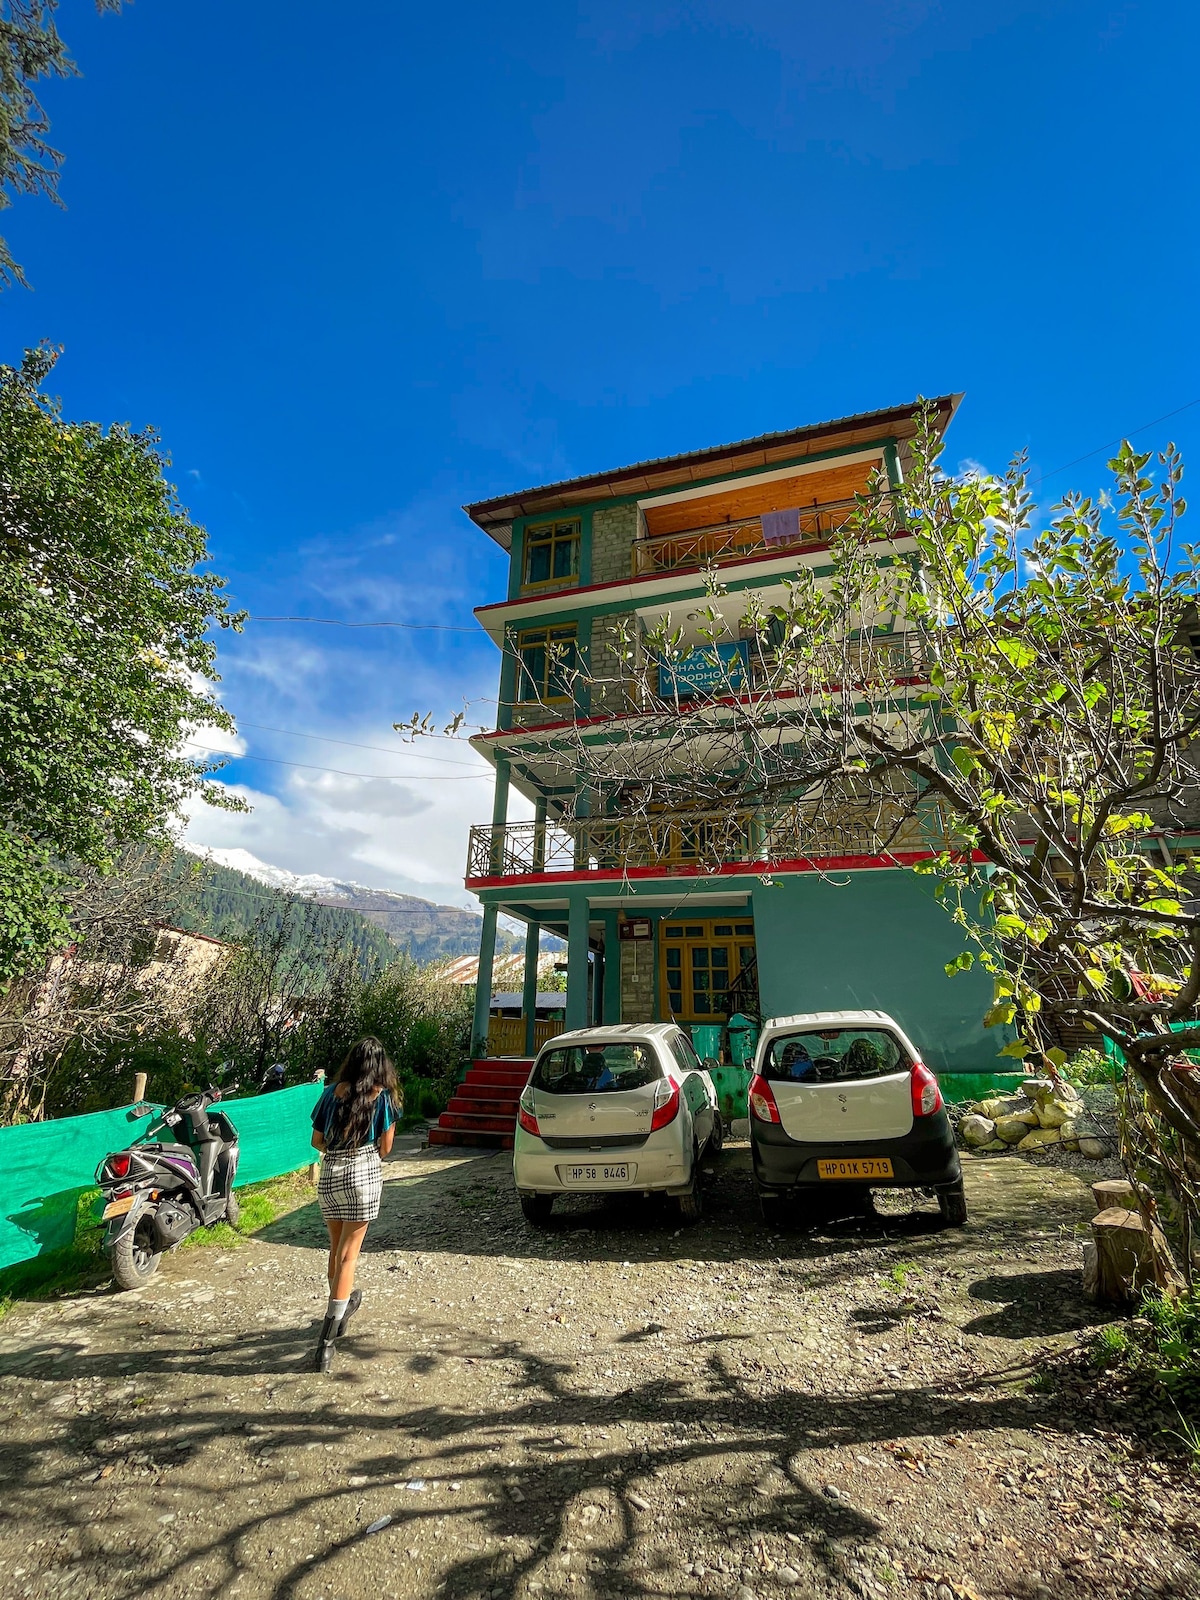 Homestay in the pine forest of manali.